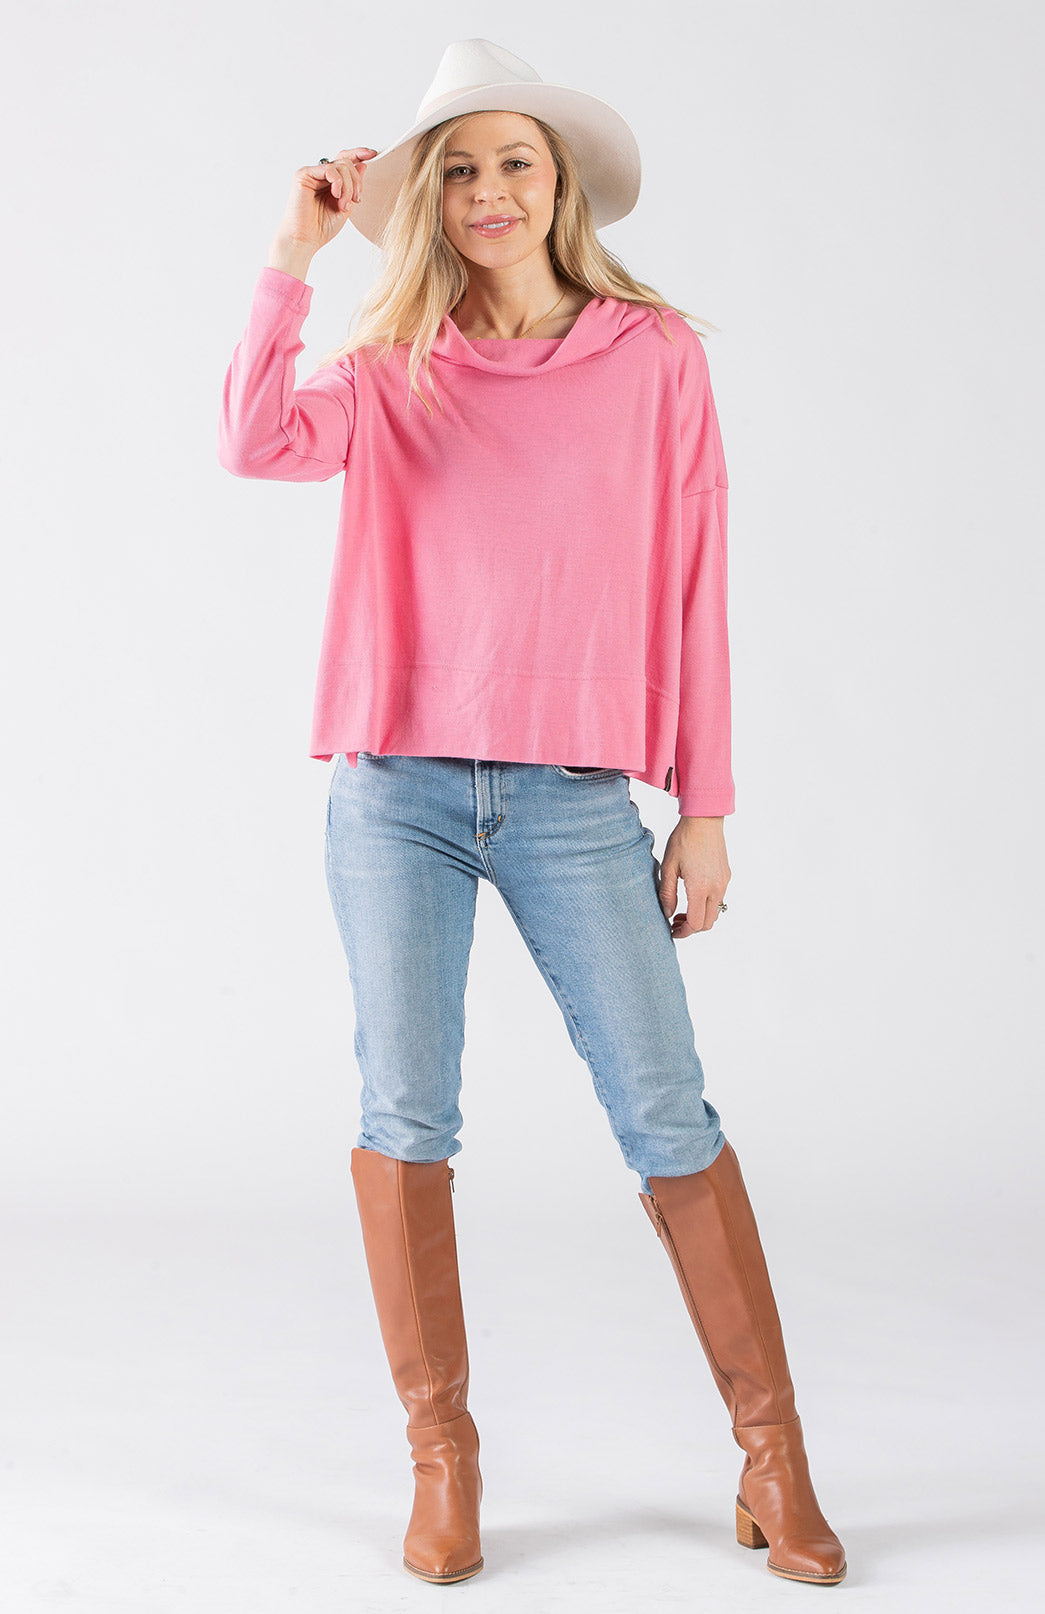 Carnation Pink Women&#39;s Merino Wool Boxy Cowl Neck Top with Long Sleeve
